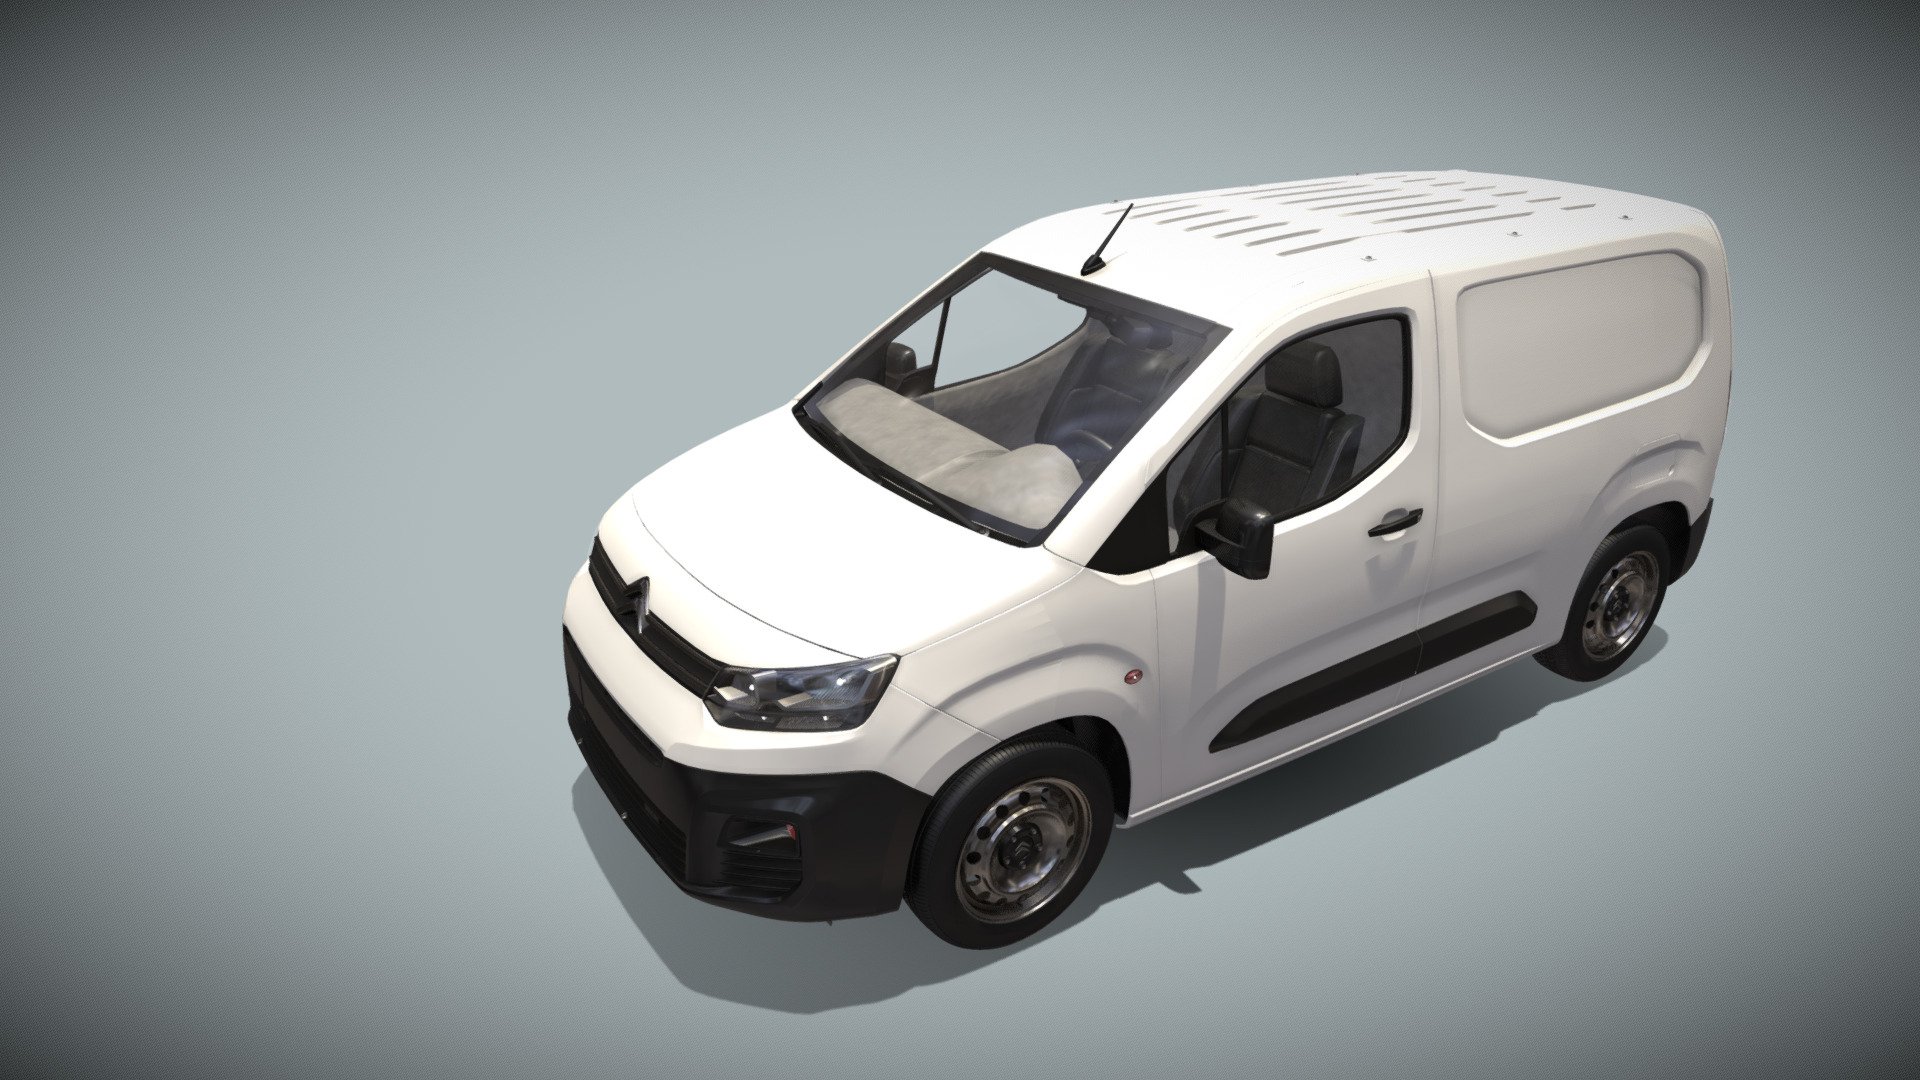 Citroen Berlingo high detailed 3D model Modeled with Maya, Textured with Substance Painter, Rendered with Blender. Thank you for buying this product. We look forward to continuously dealing with you.
Your valuable feedback makes me motivated 3d model